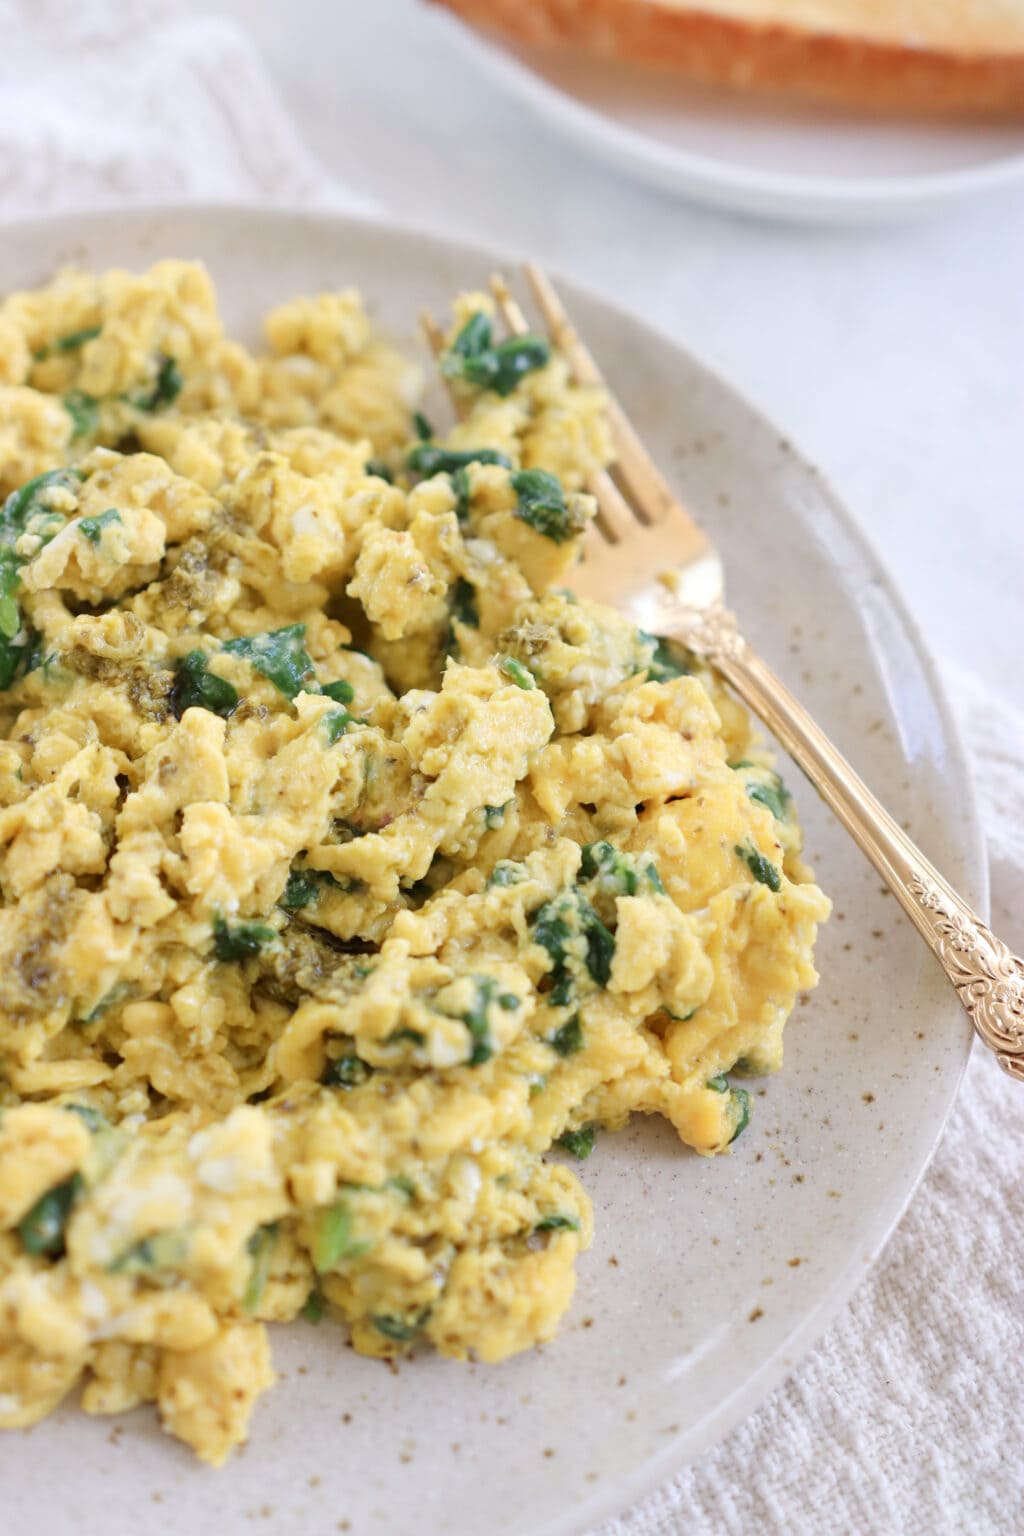 A plate of scrambled eggs with spinach in them.